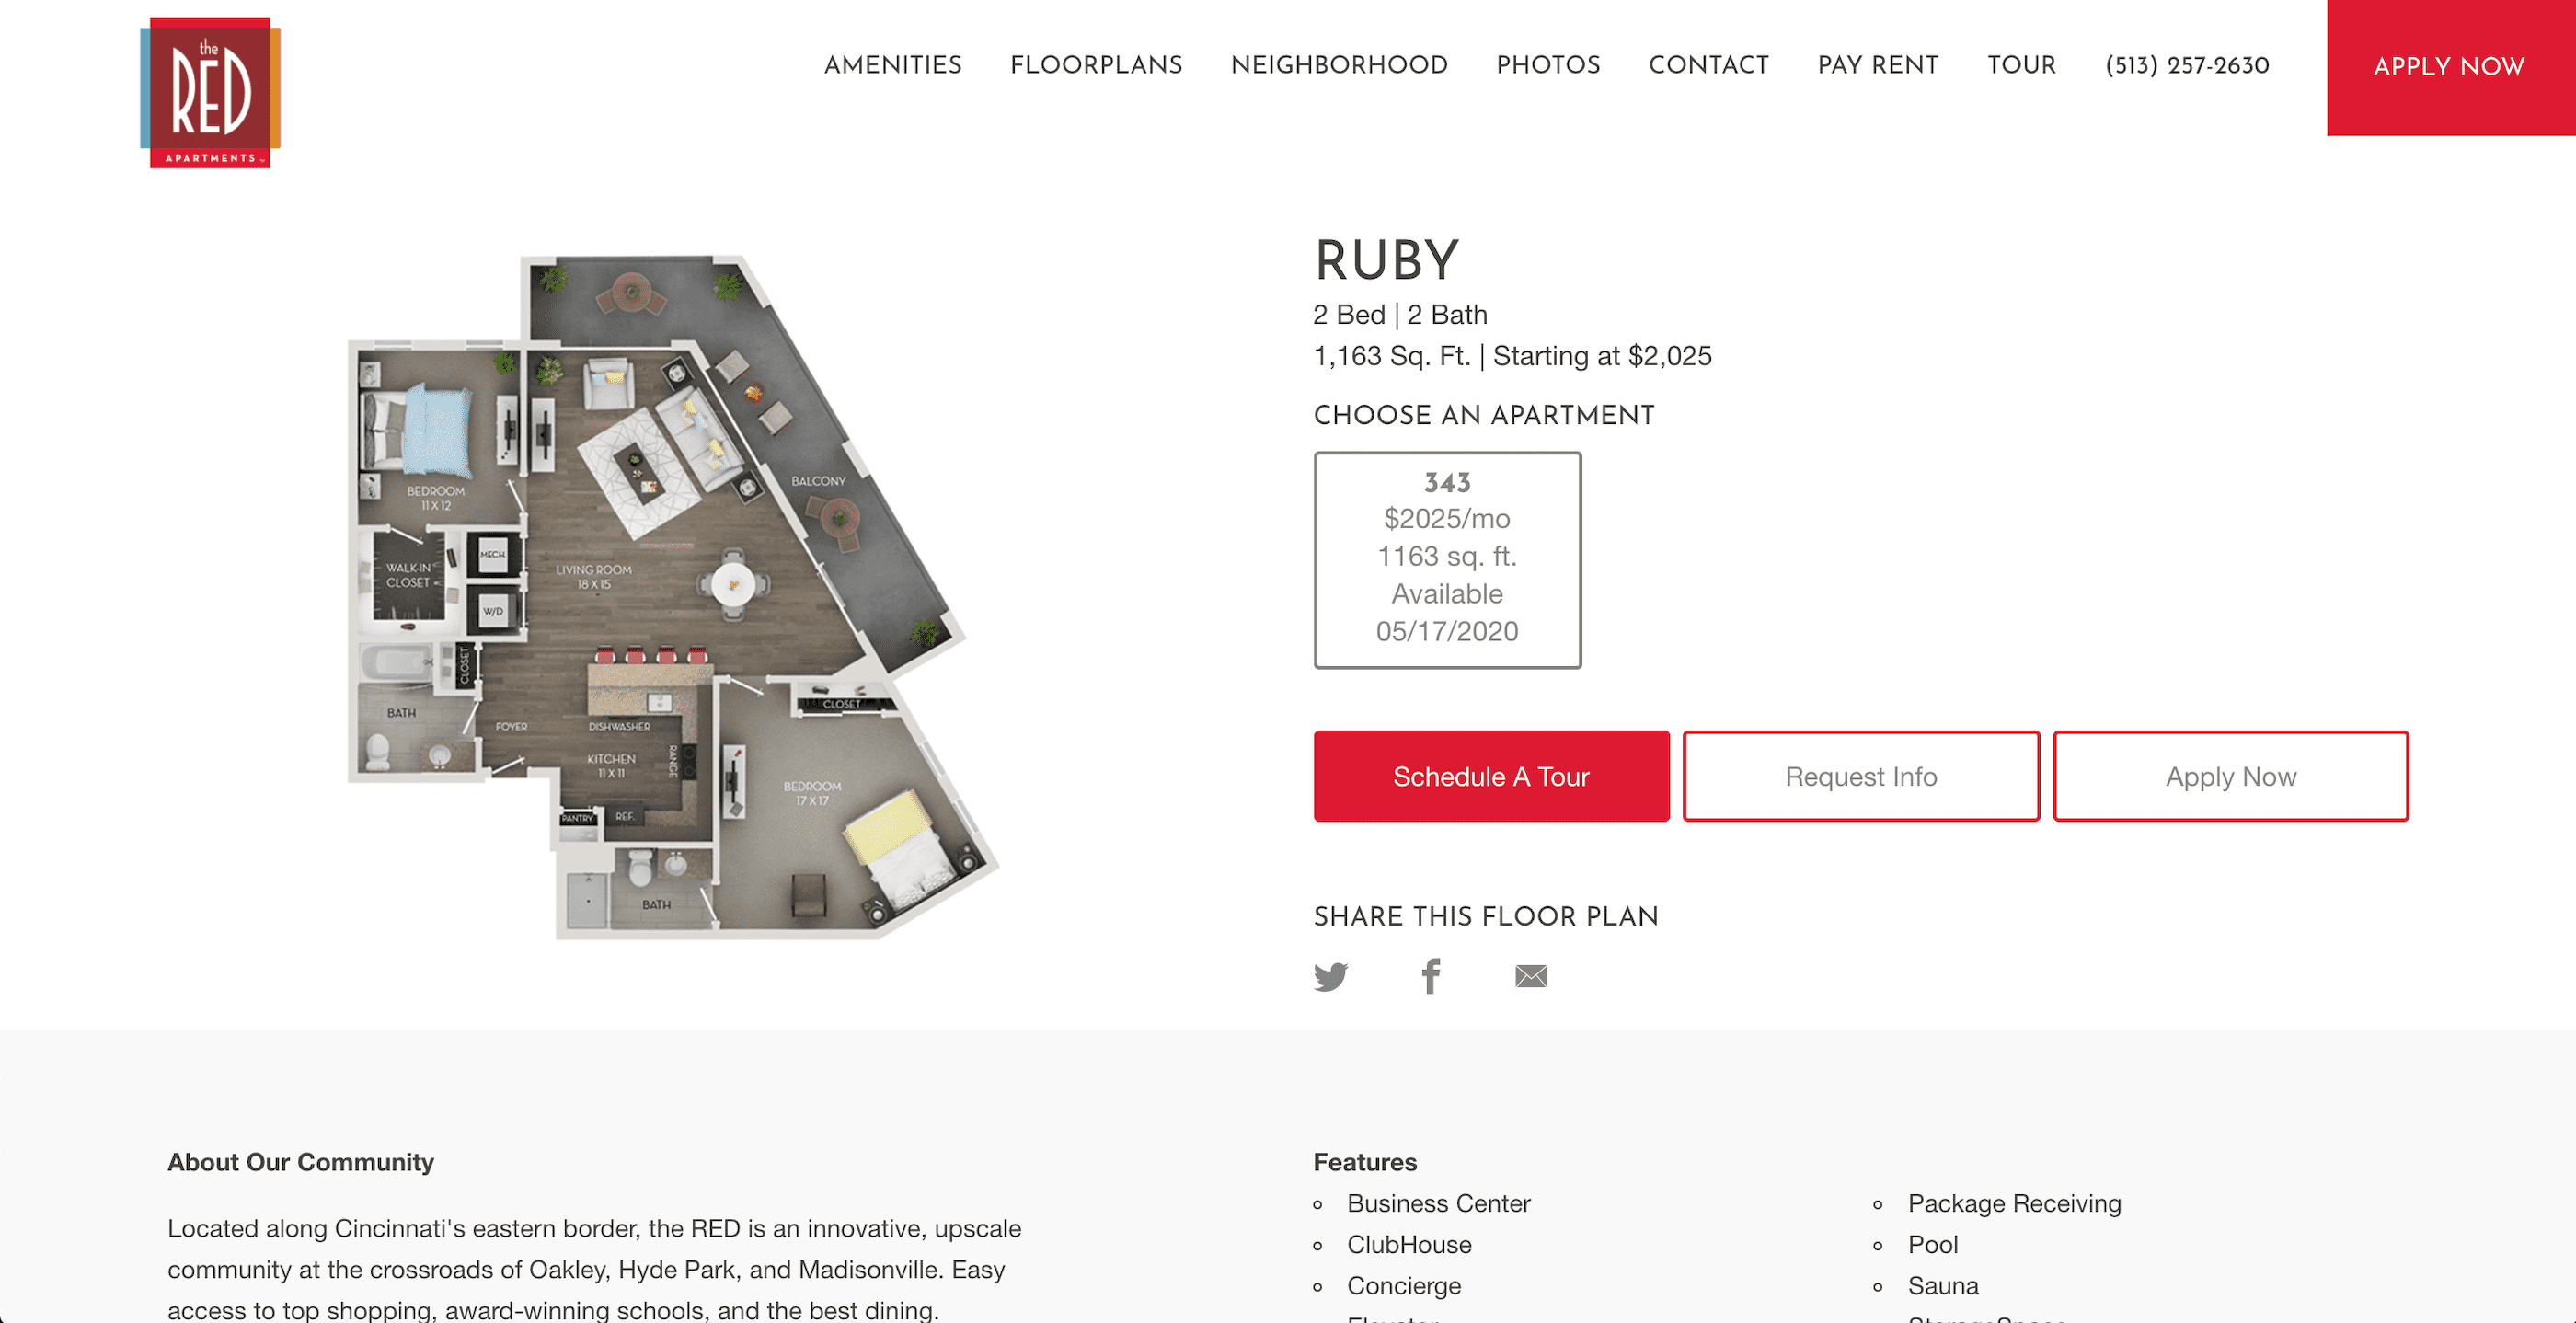 Floor Plan product page showing 1 available apartment